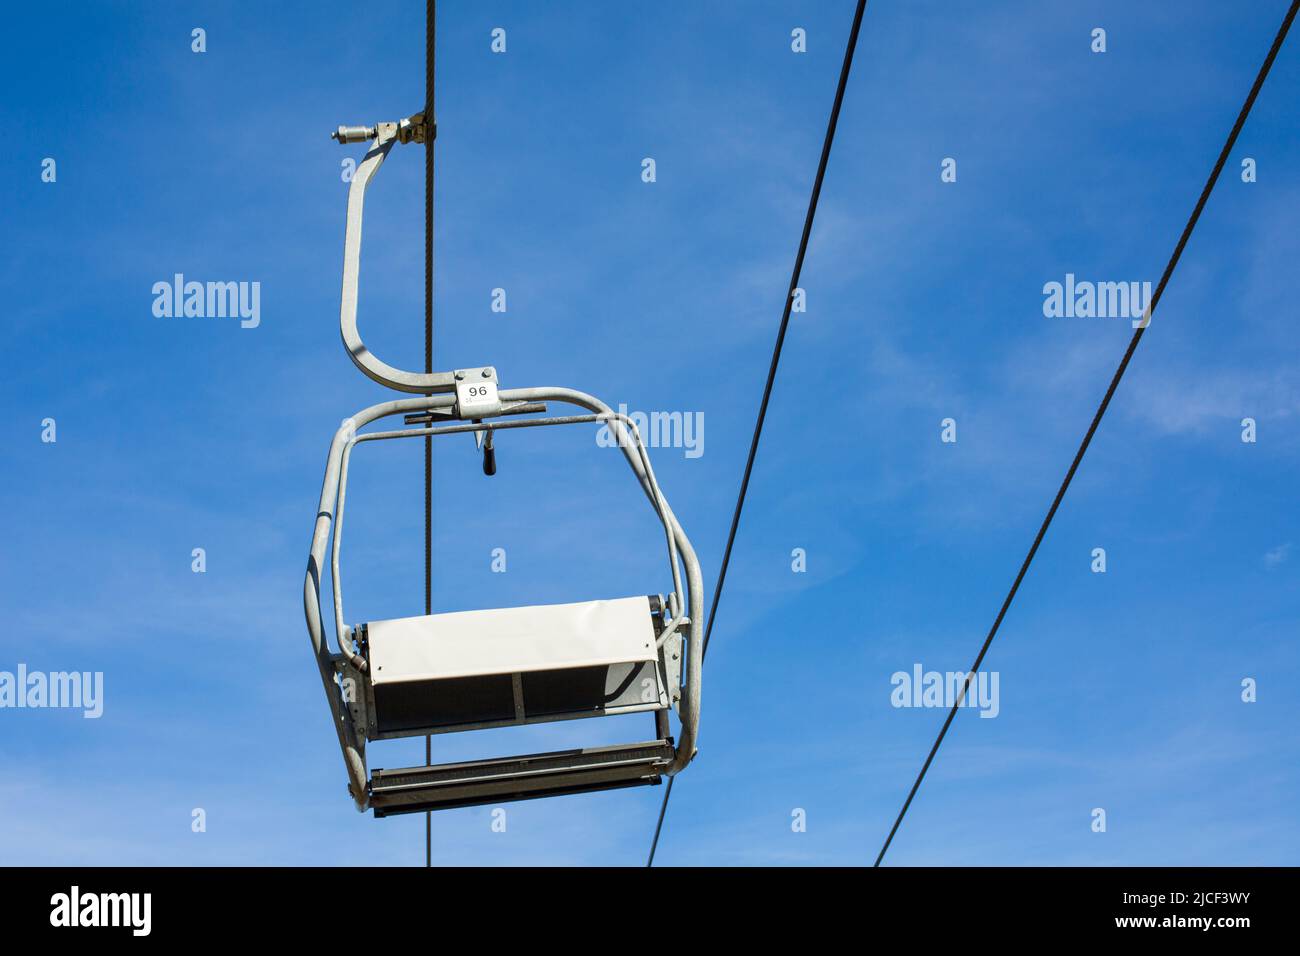 Oberammergau, Germany - Oct 31, 2021: View on a single, hanging chairlift. Blue sky in the background, no people. Stock Photo